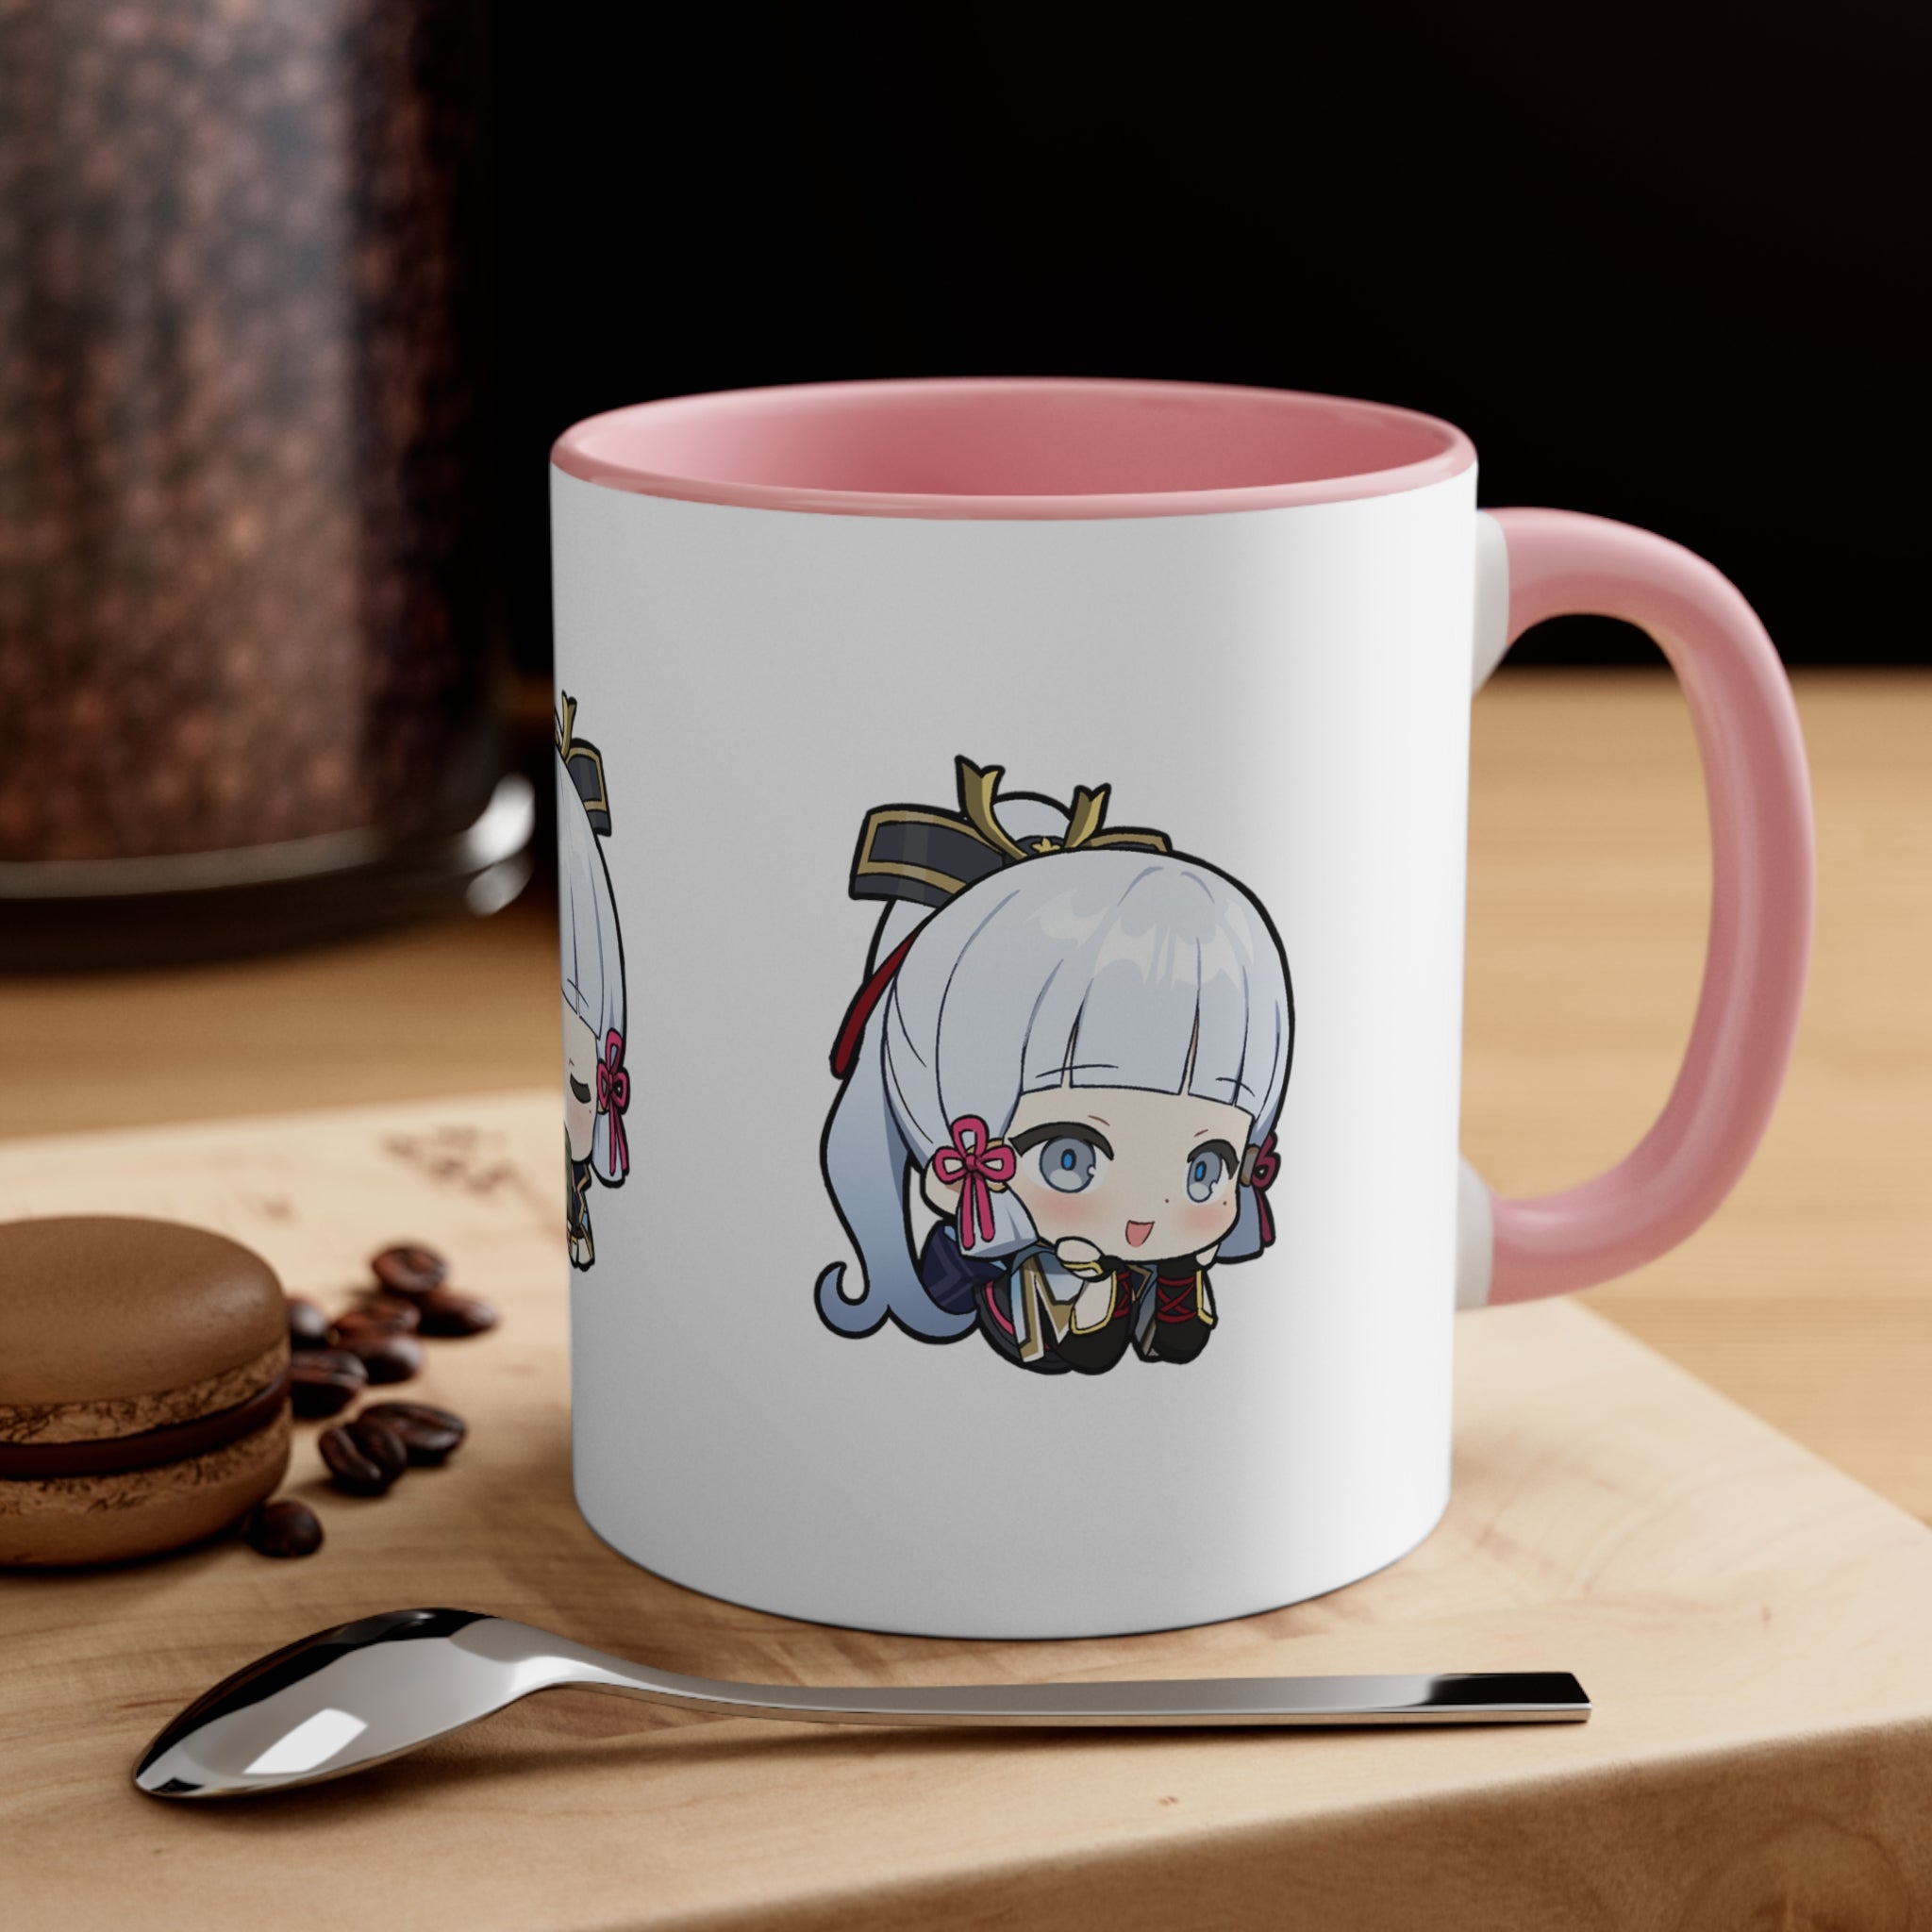 Ayaka Genshin Impact Accent Coffee Mug, 11oz Cups Mugs Cup Gift For Gamer Gifts Game Anime Fanart Fan Birthday Valentine's Christmas